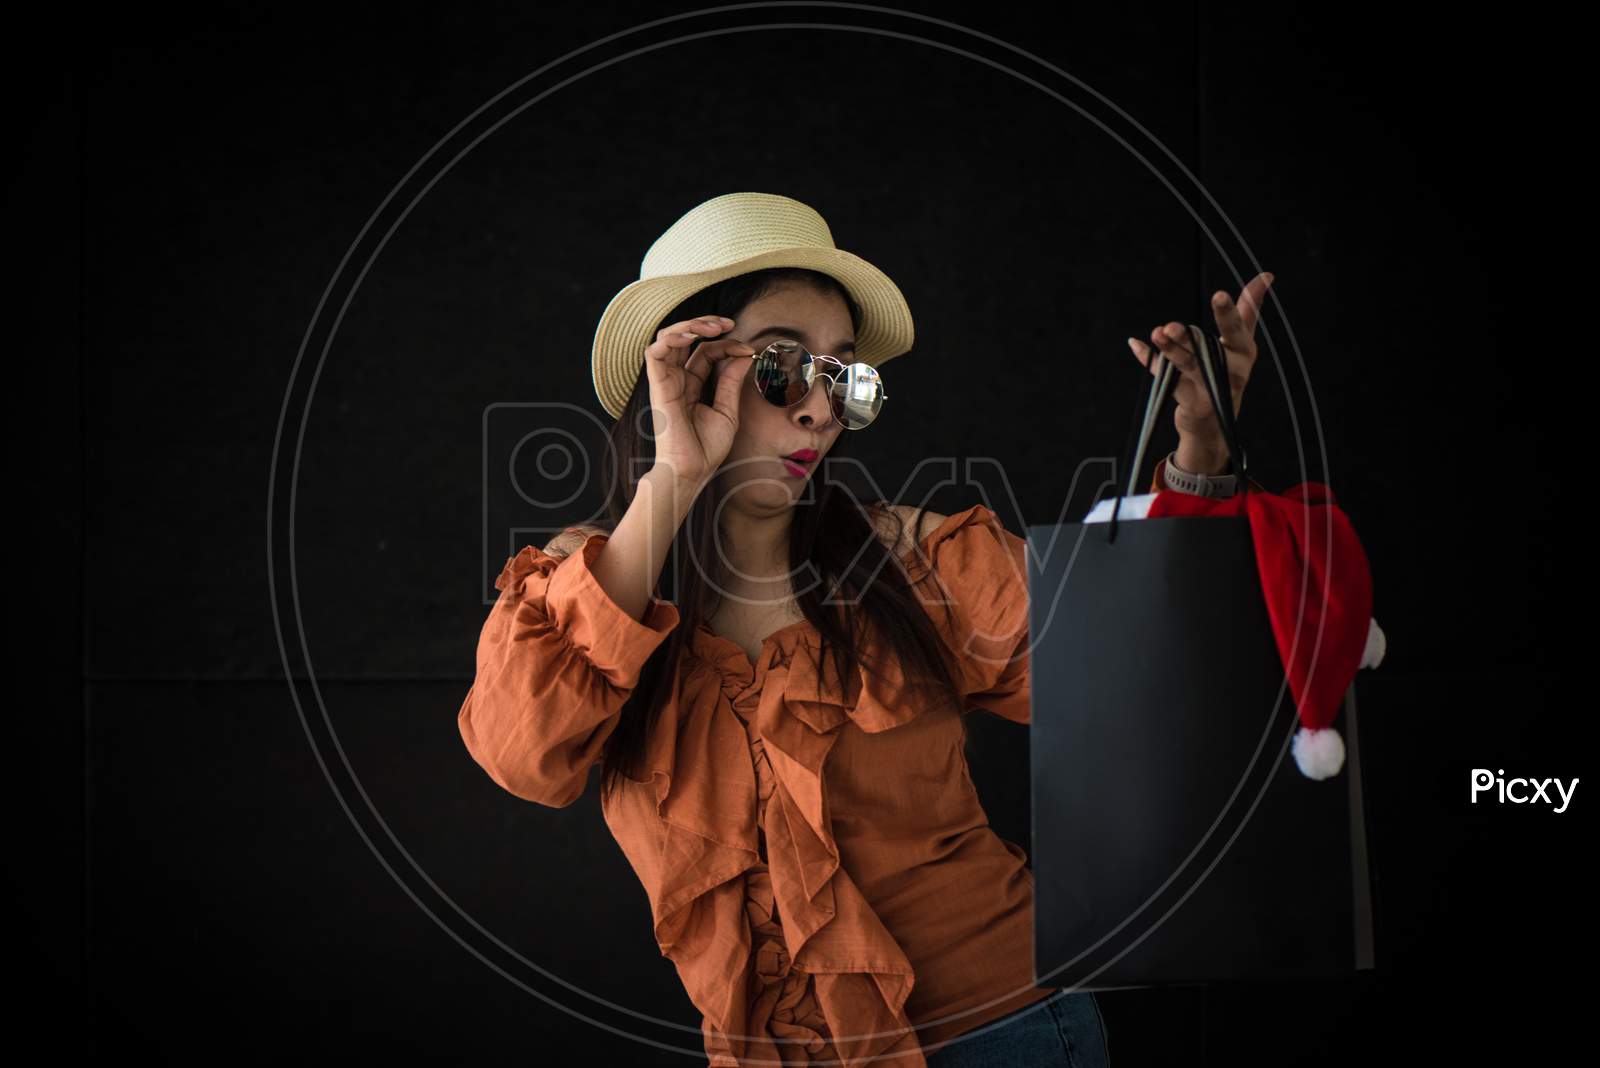 Asian Shopping Woman Surprised With Black Friday Shopping Bag And Santa Claus Hat Inside On Black Background. Shopaholics And Beauty Fashion Theme.